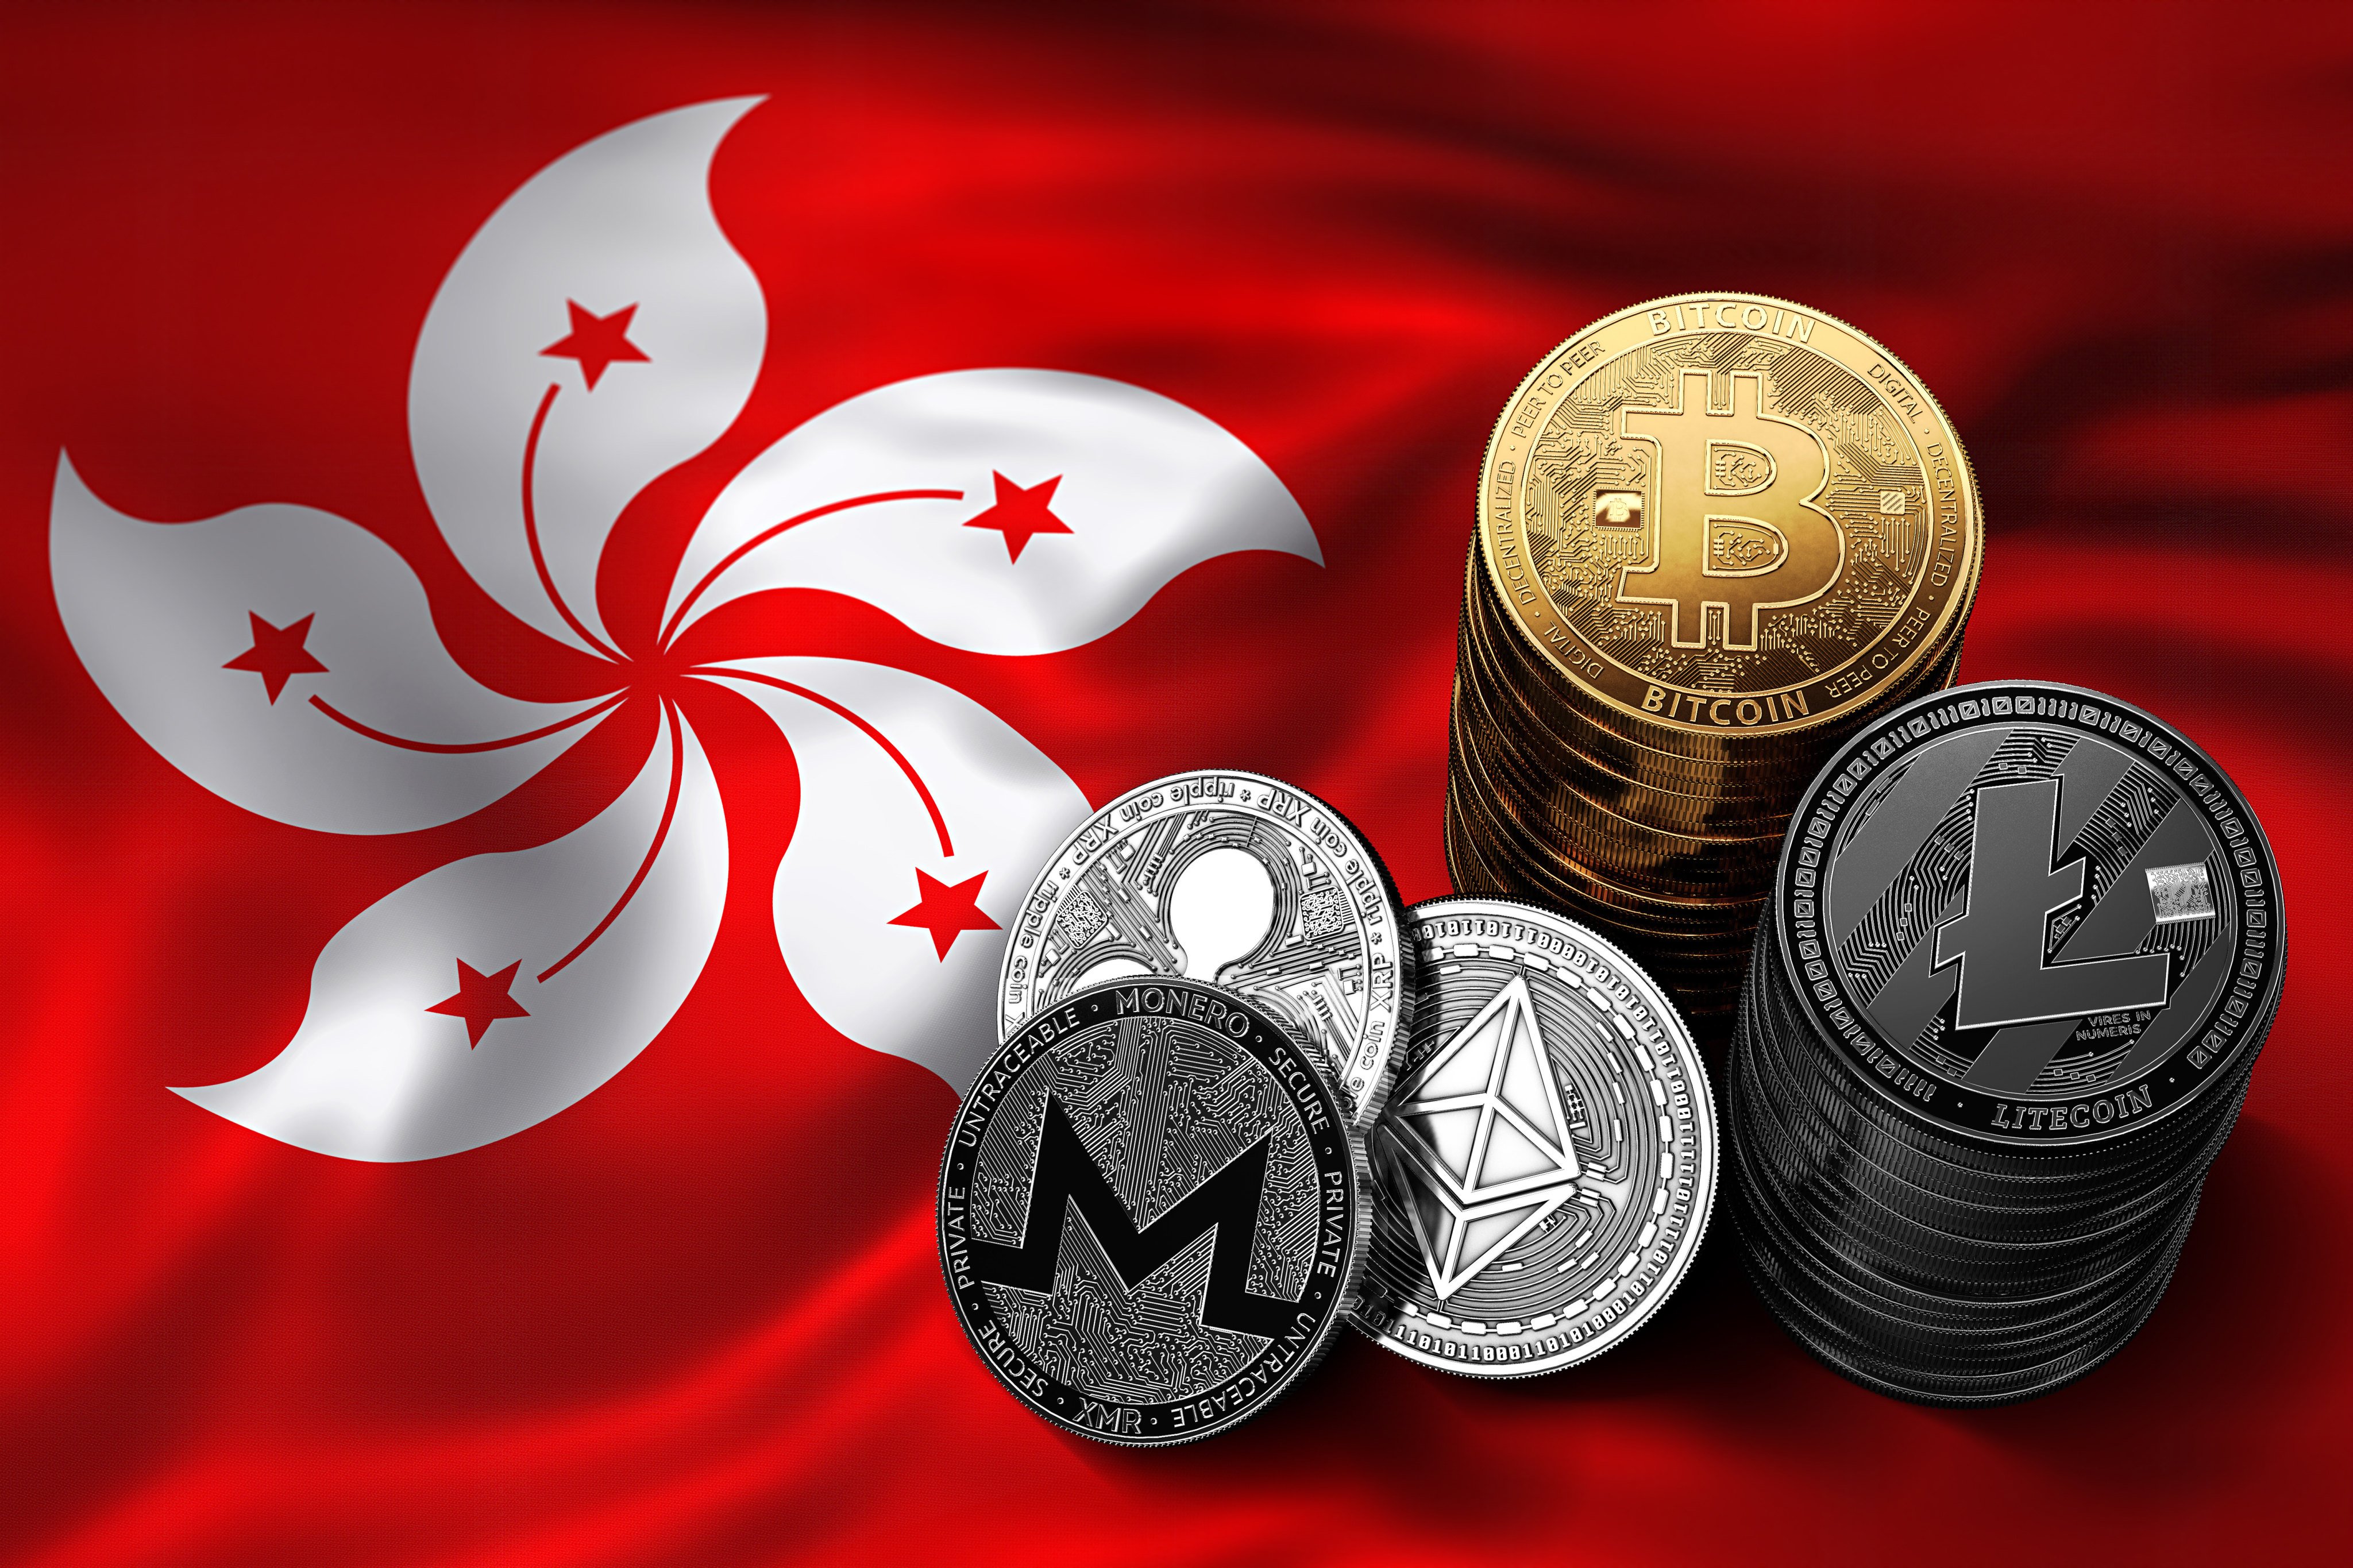 The day after Hong Kong’s licence application deadline for cryptocurrency exchanges, the number of applicants was a third of the interest that a similar scheme in Singapore saw a few years ago. Photo: Shutterstock